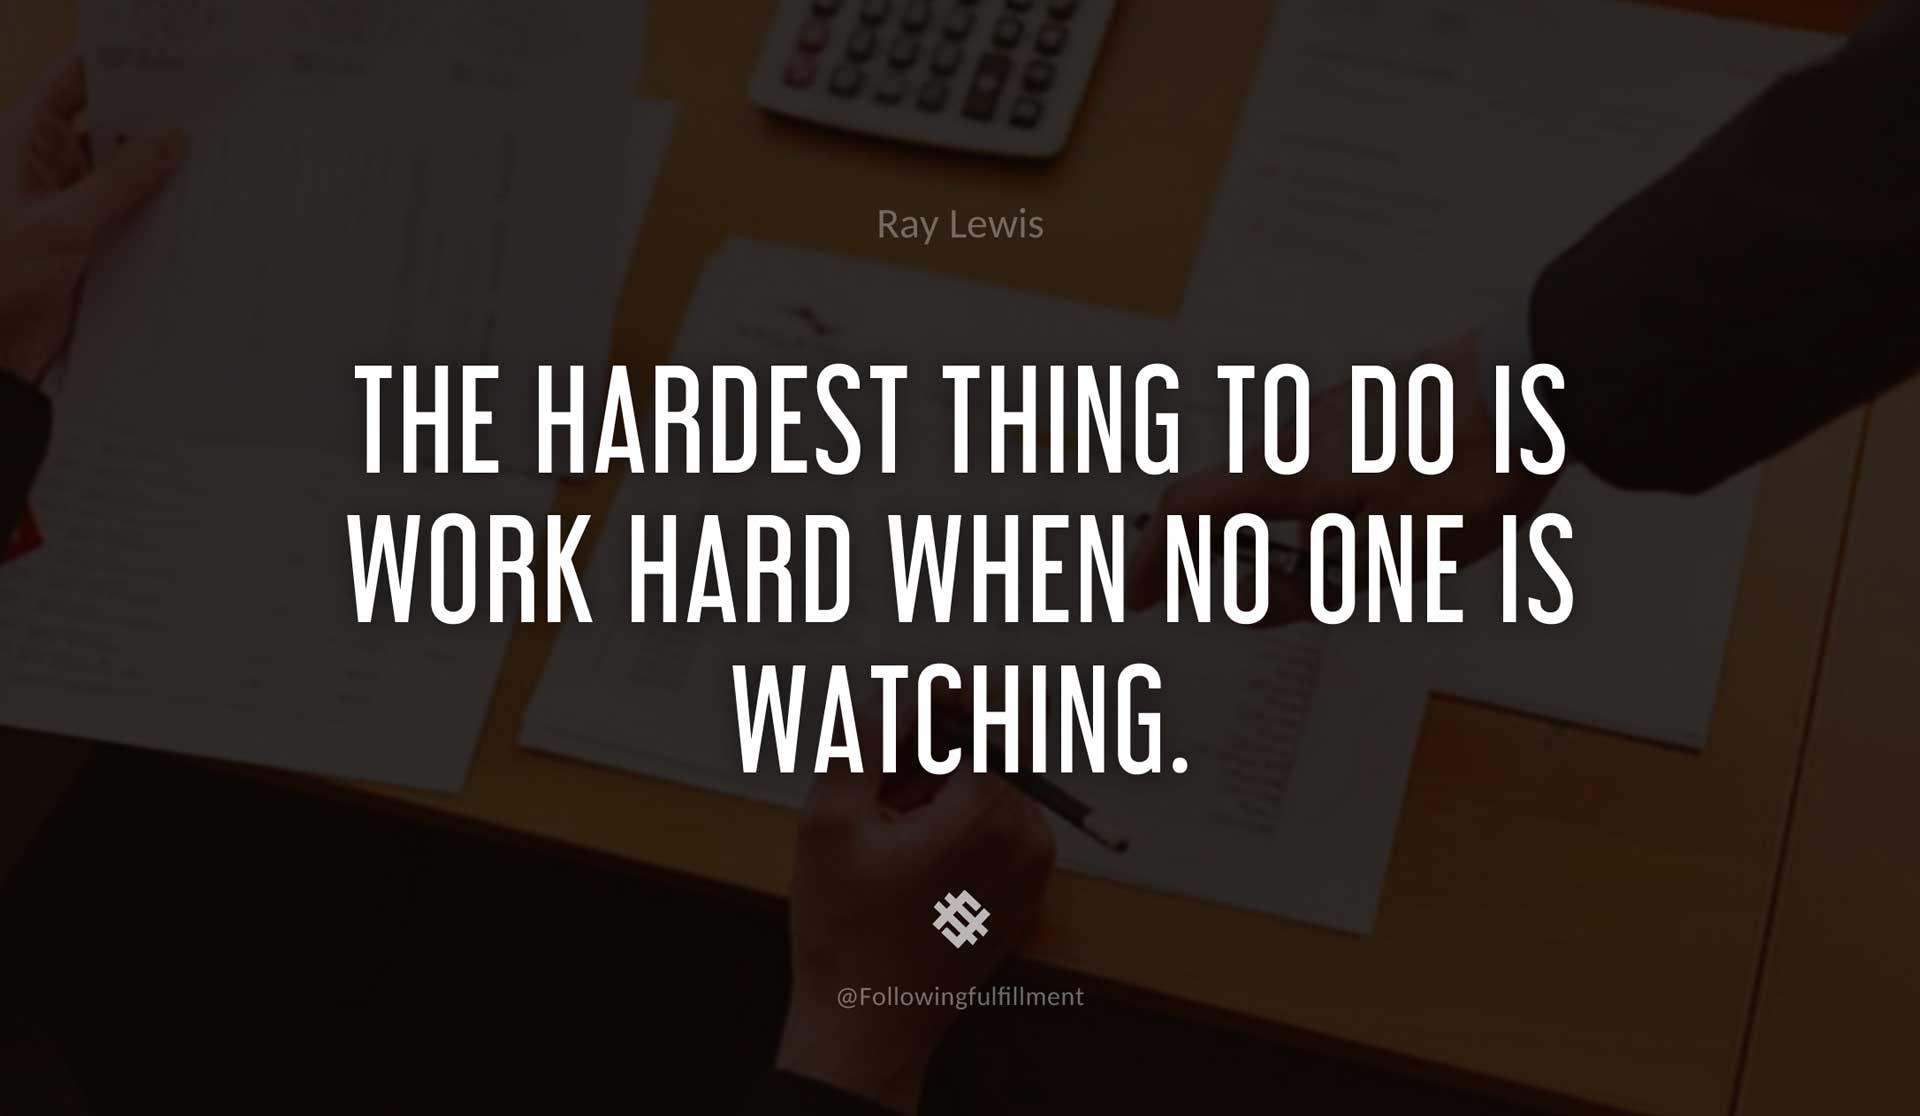 The-hardest-thing-to-do-is-work-hard-when-no-one-is-watching.-RAY-LEWIS-Quote.jpg